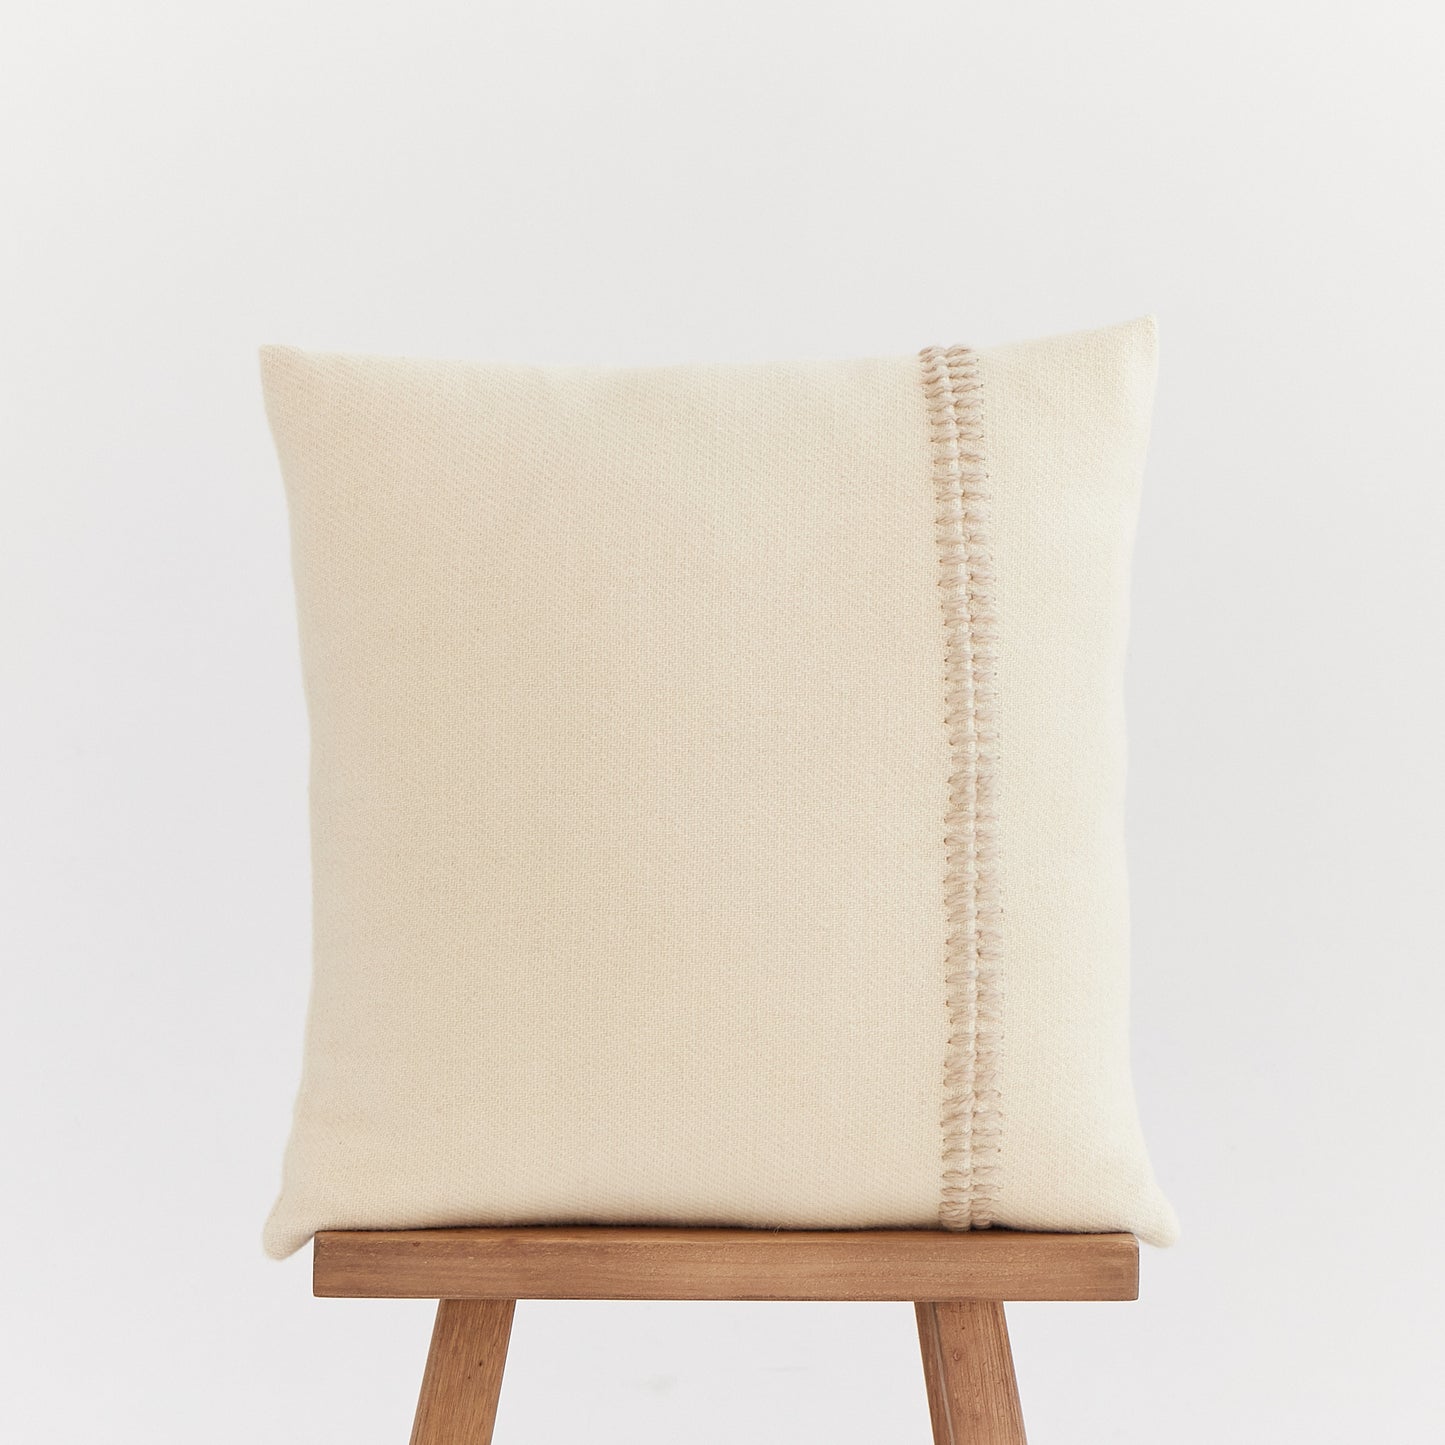 Hand-Dyed Wool Embroidered Pillow Cover - Sofia Collection